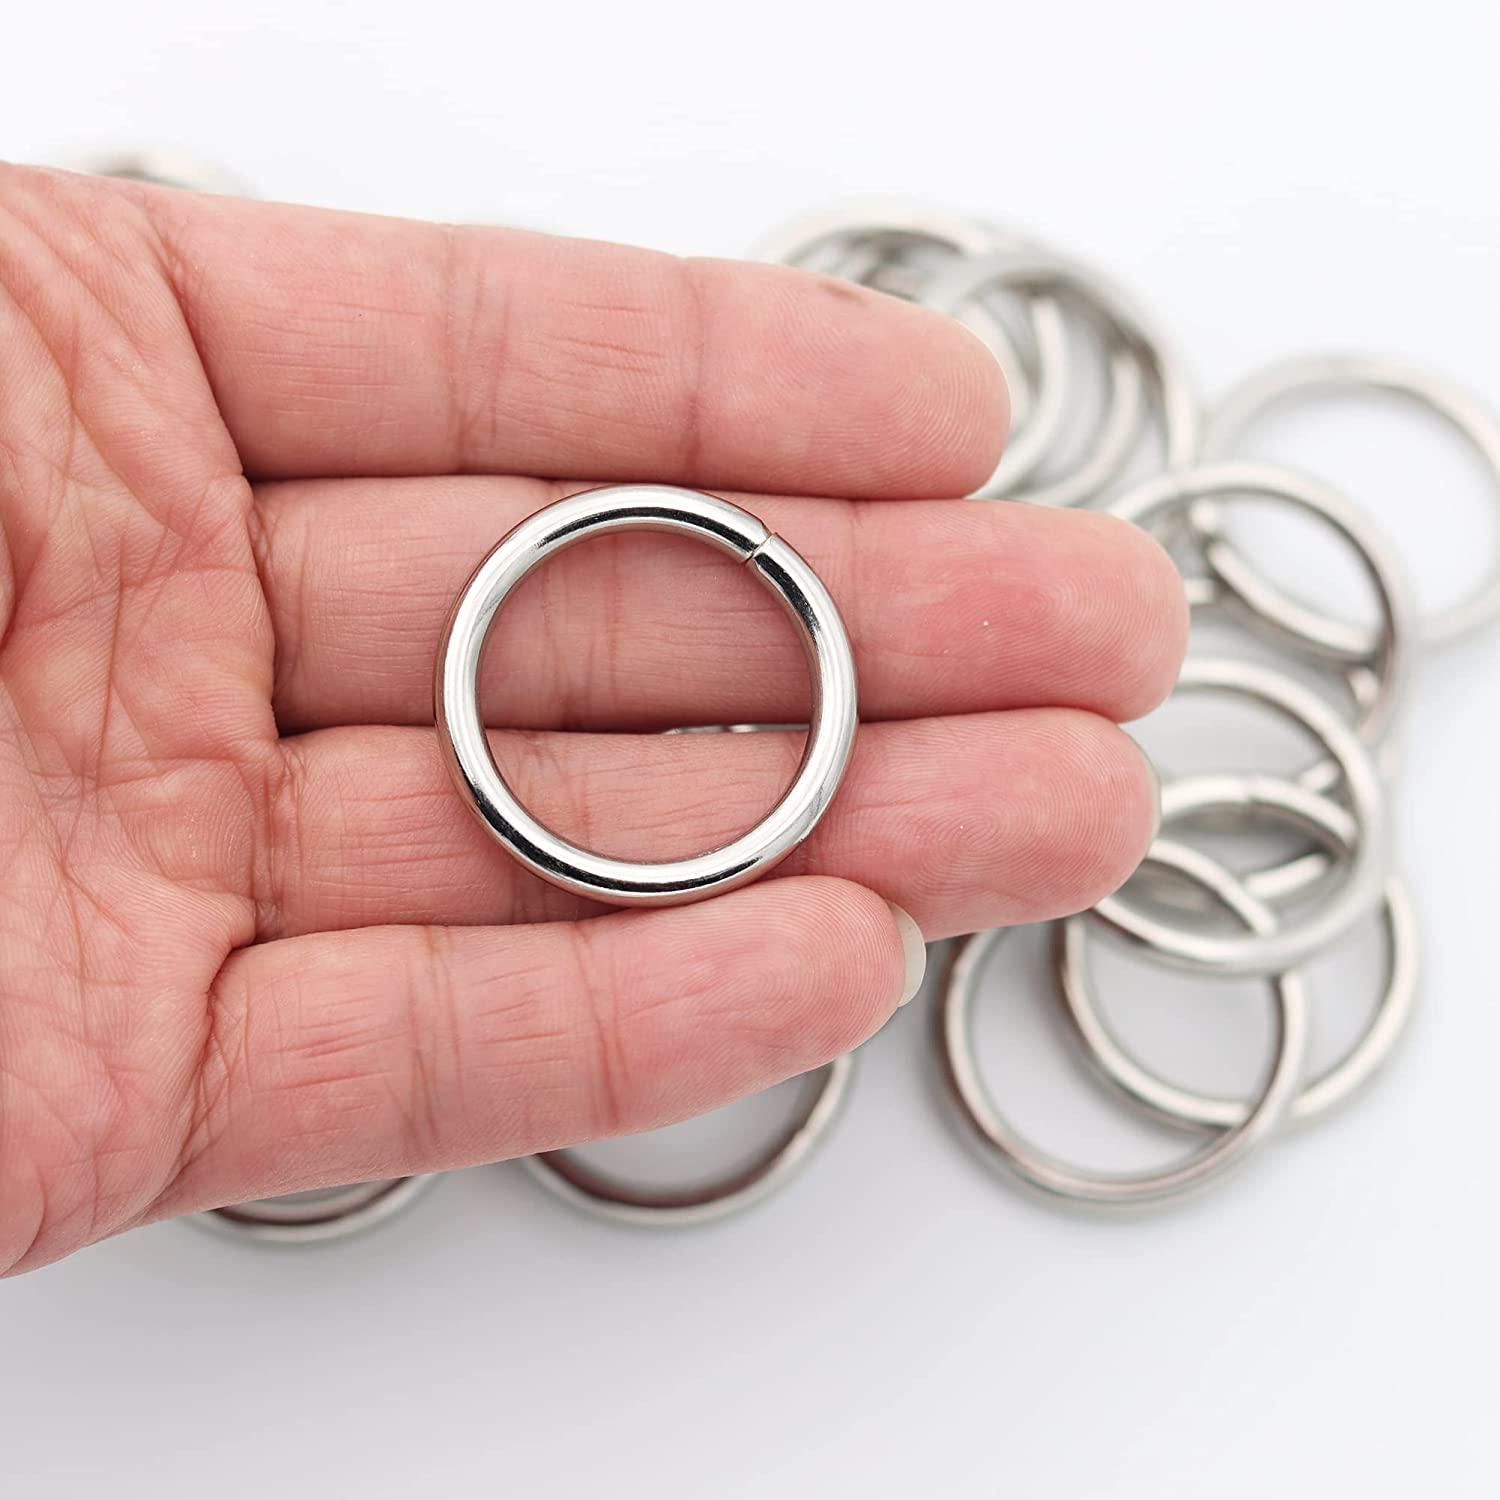 50 Pack of Metal D Rings Heavy Duty 3/4 inch D-Rings for Sewing, Keychains, Belts and Dog Leash